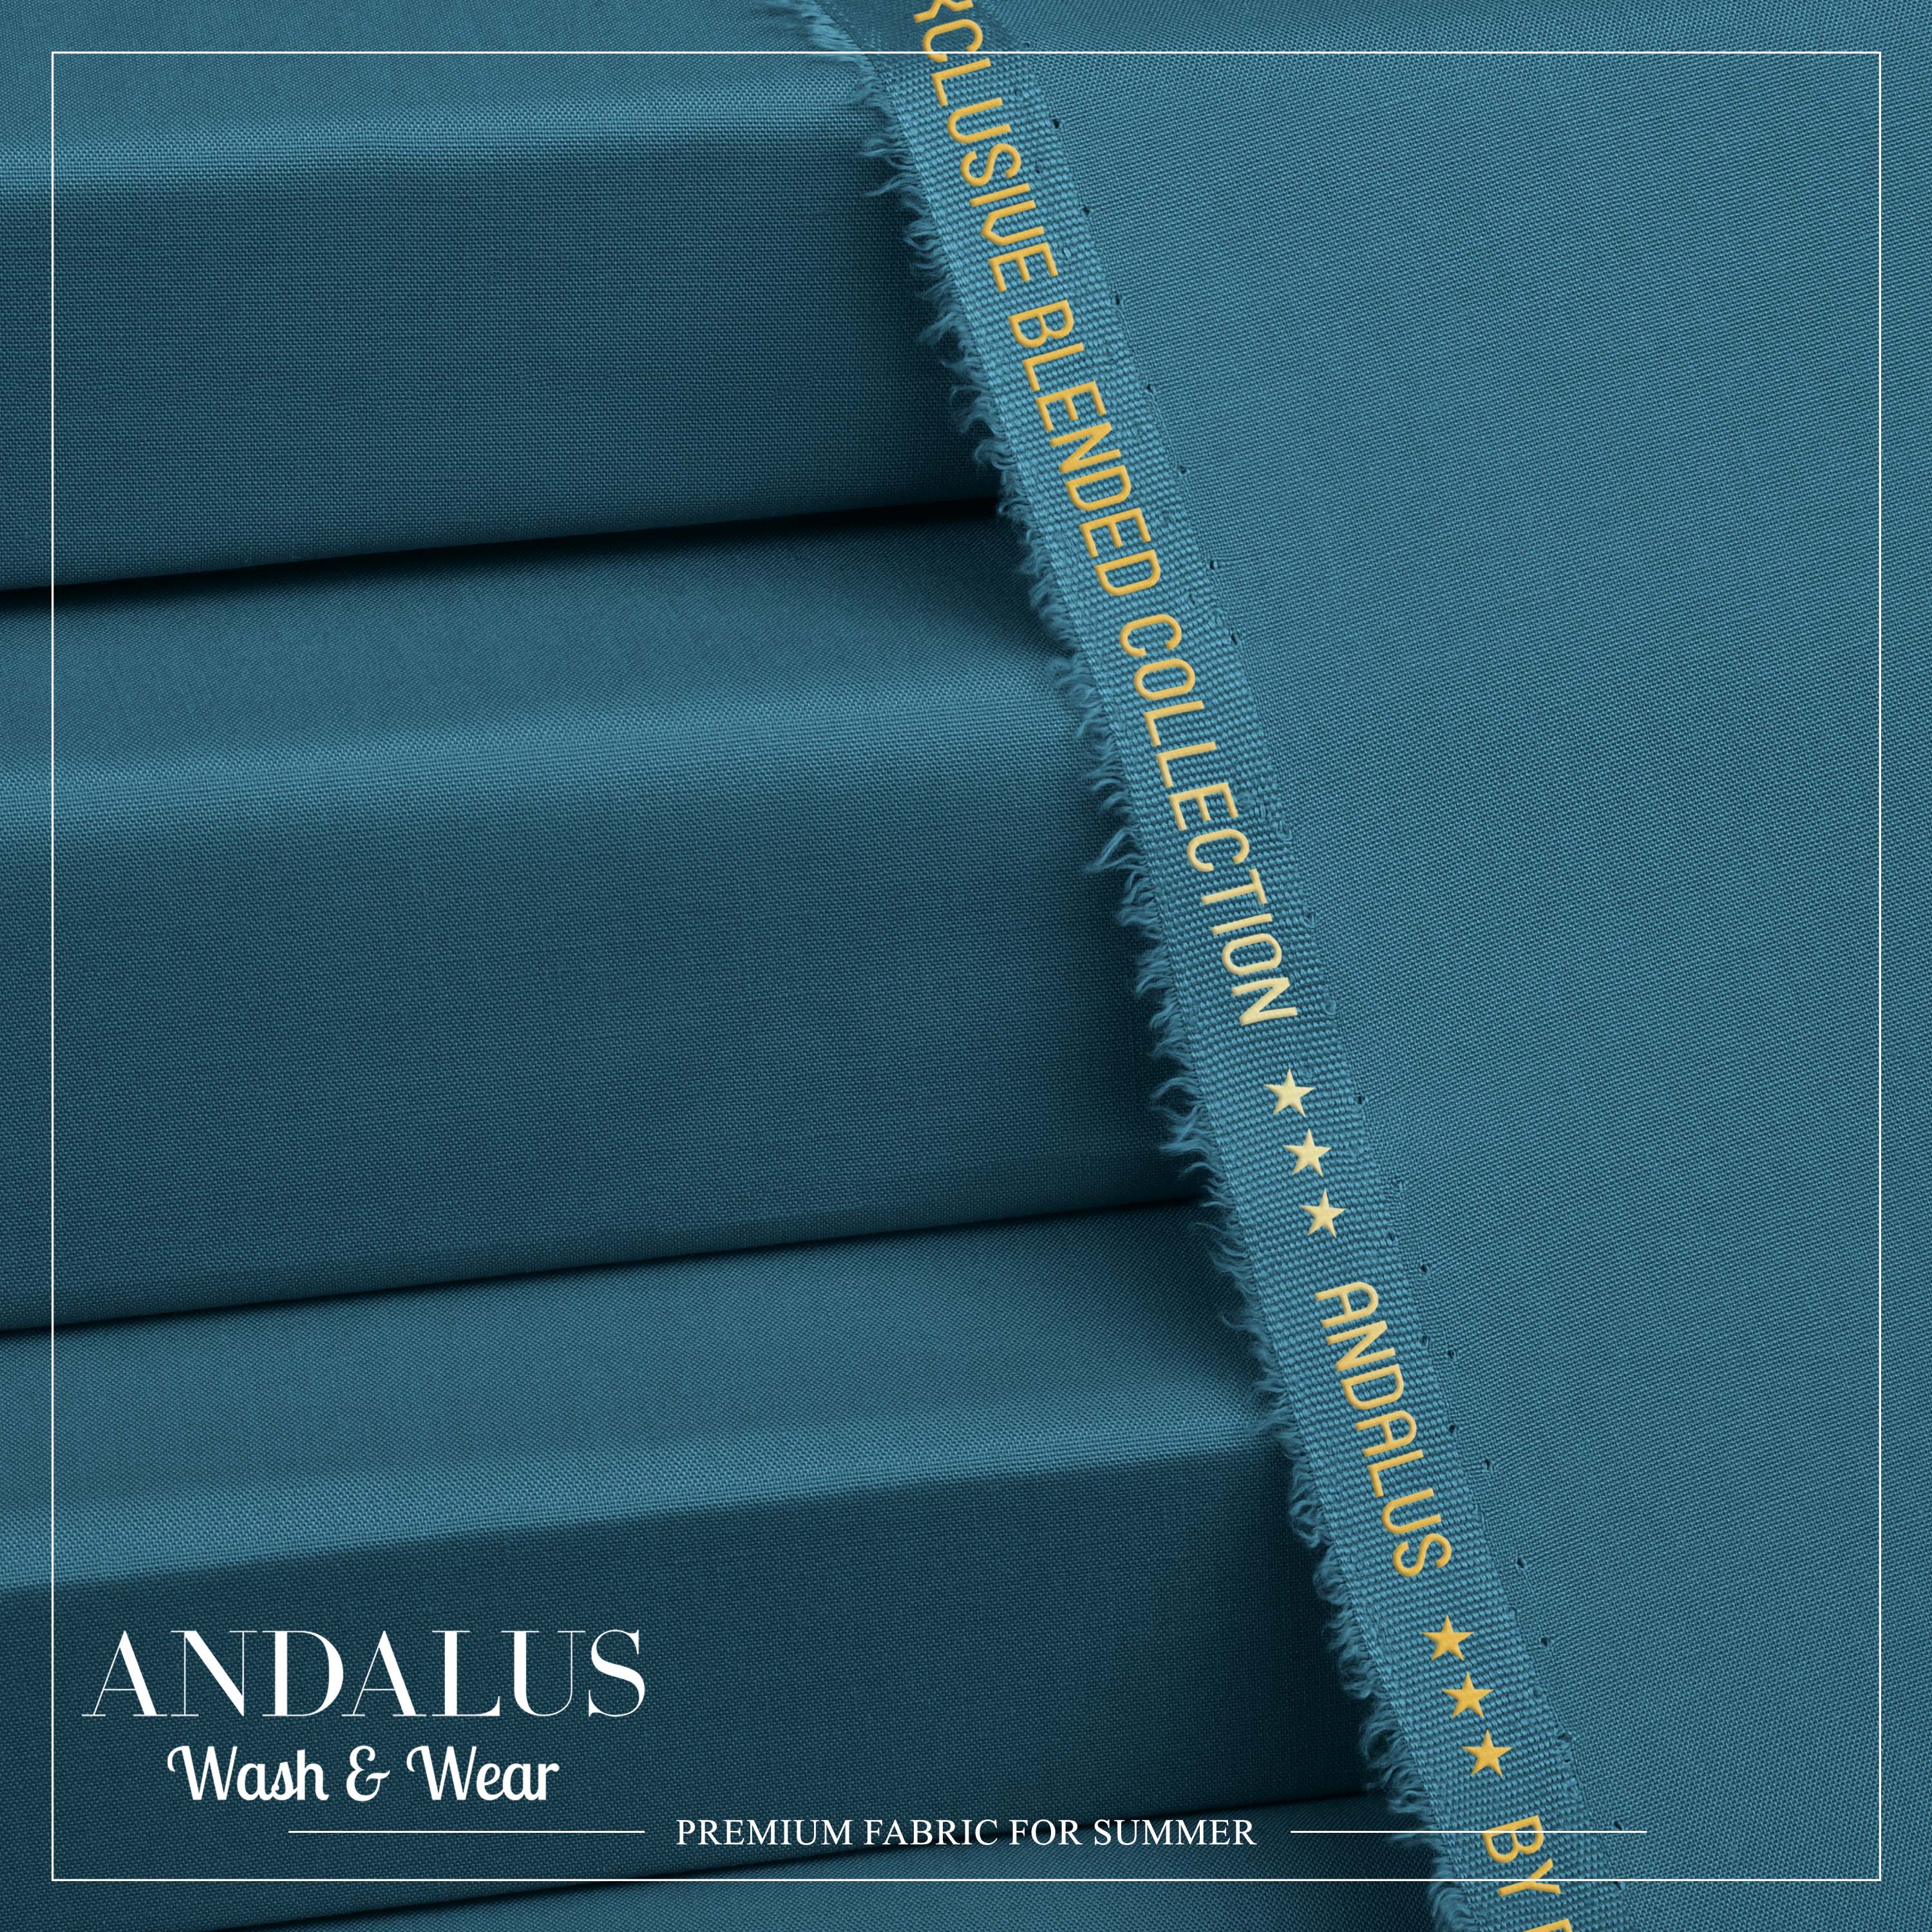 Teal - Andalus - Wash & Wear Fabric